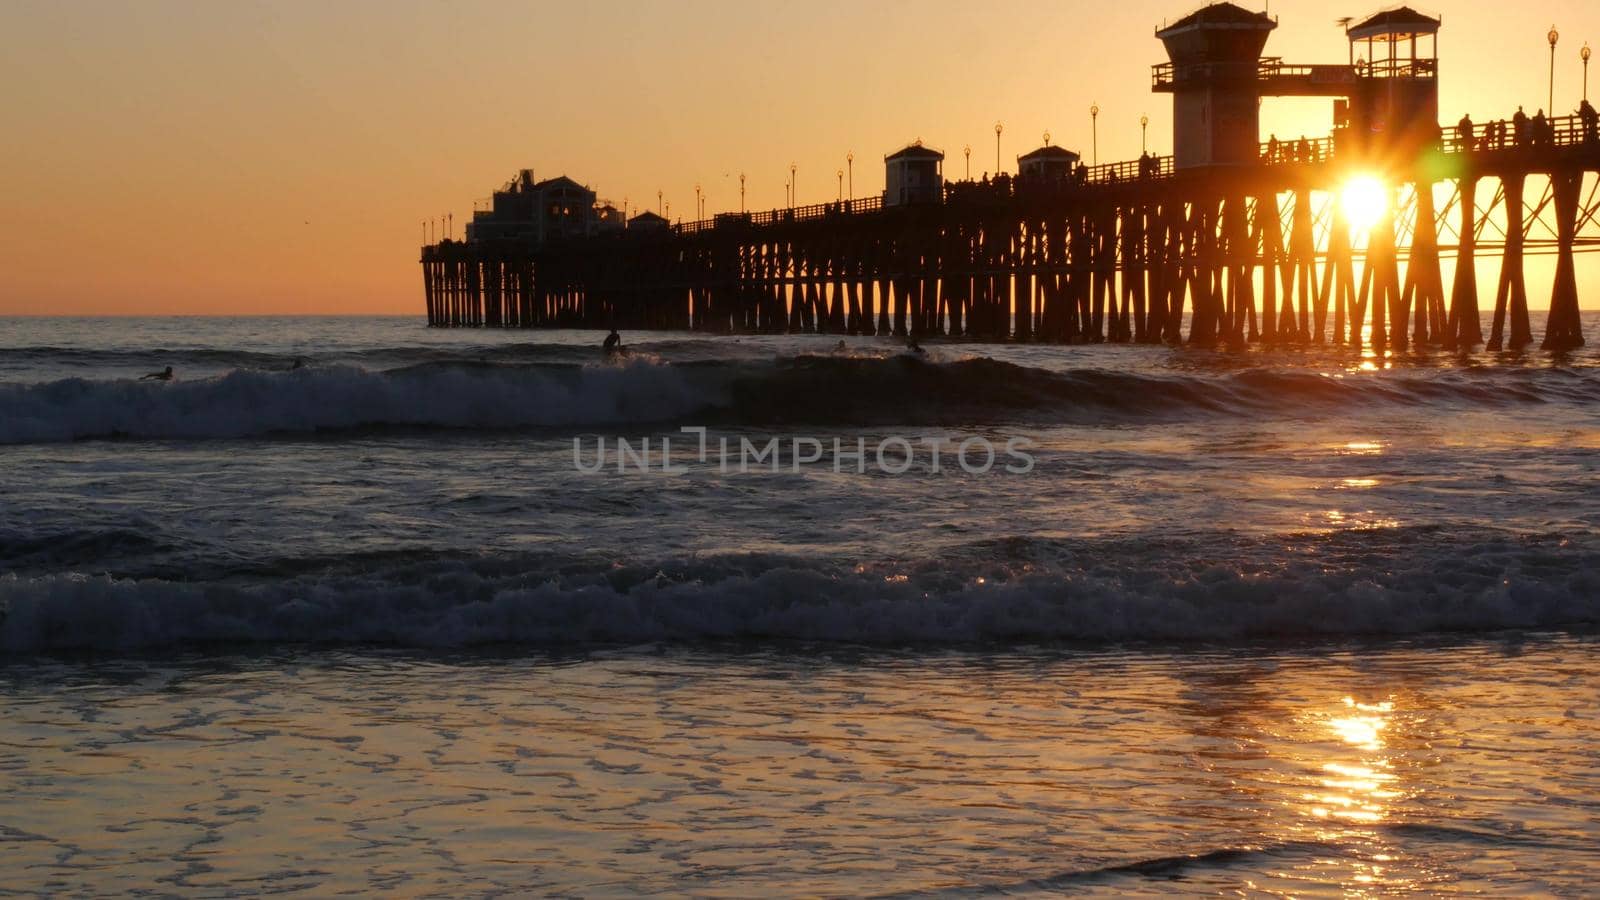 Oceanside, California USA - 16 Feb 2020: Surfer silhouette, pacific ocean beach in evening, water waves and sunset. Tropical coastline, waterfront vacation resort. People enjoy surfing as sport hobby.